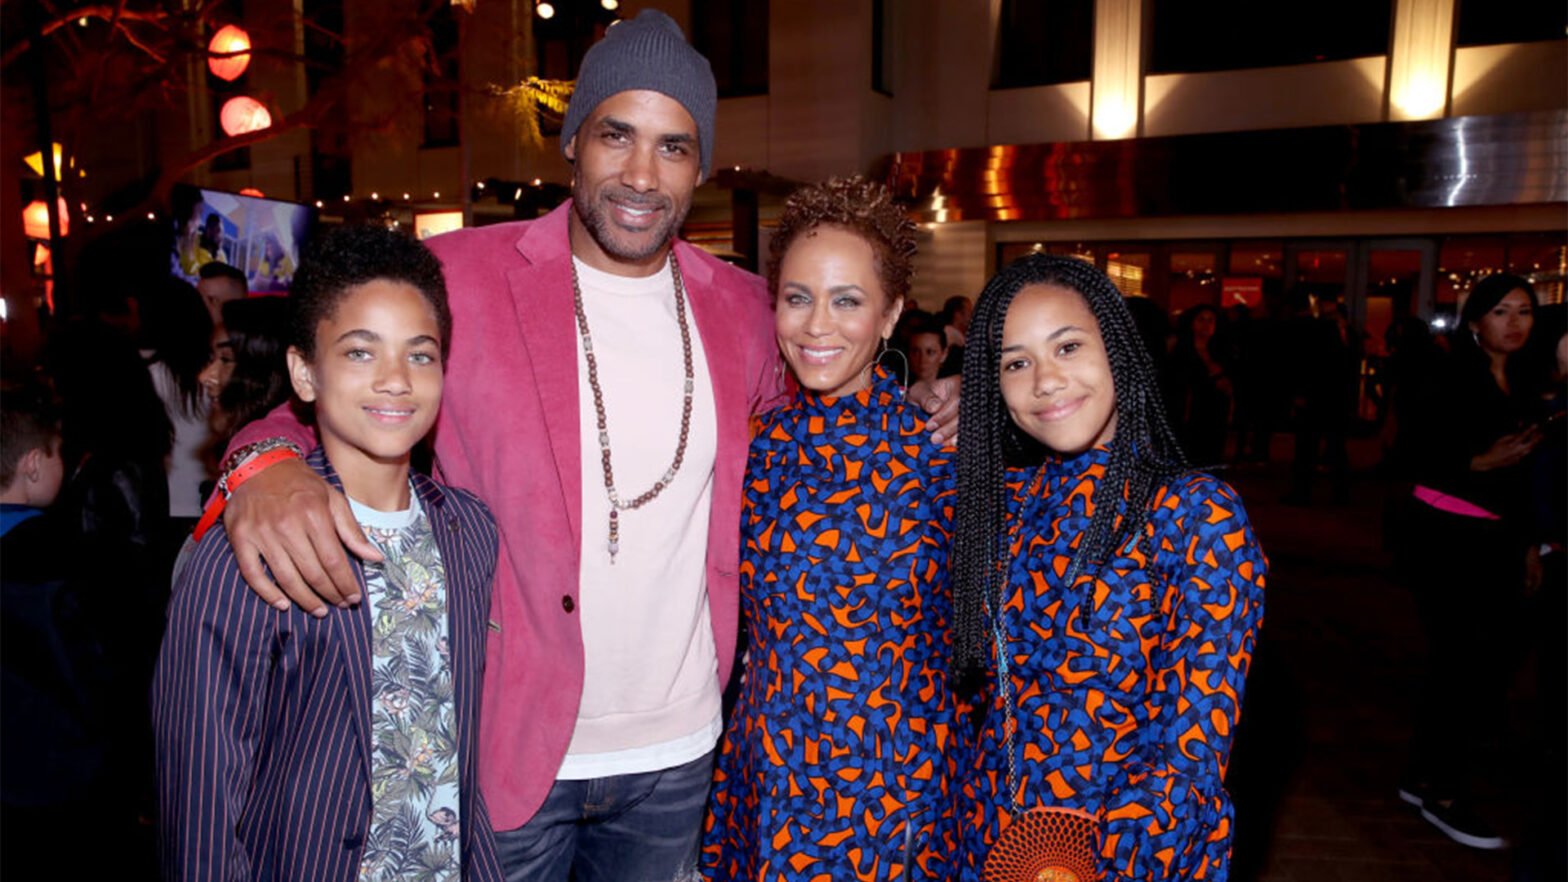 Boris Kodjoe Has A $5M Net Worth, But That Pales In Comparison To The Priceless Fortune He's Built As A Husband And Father